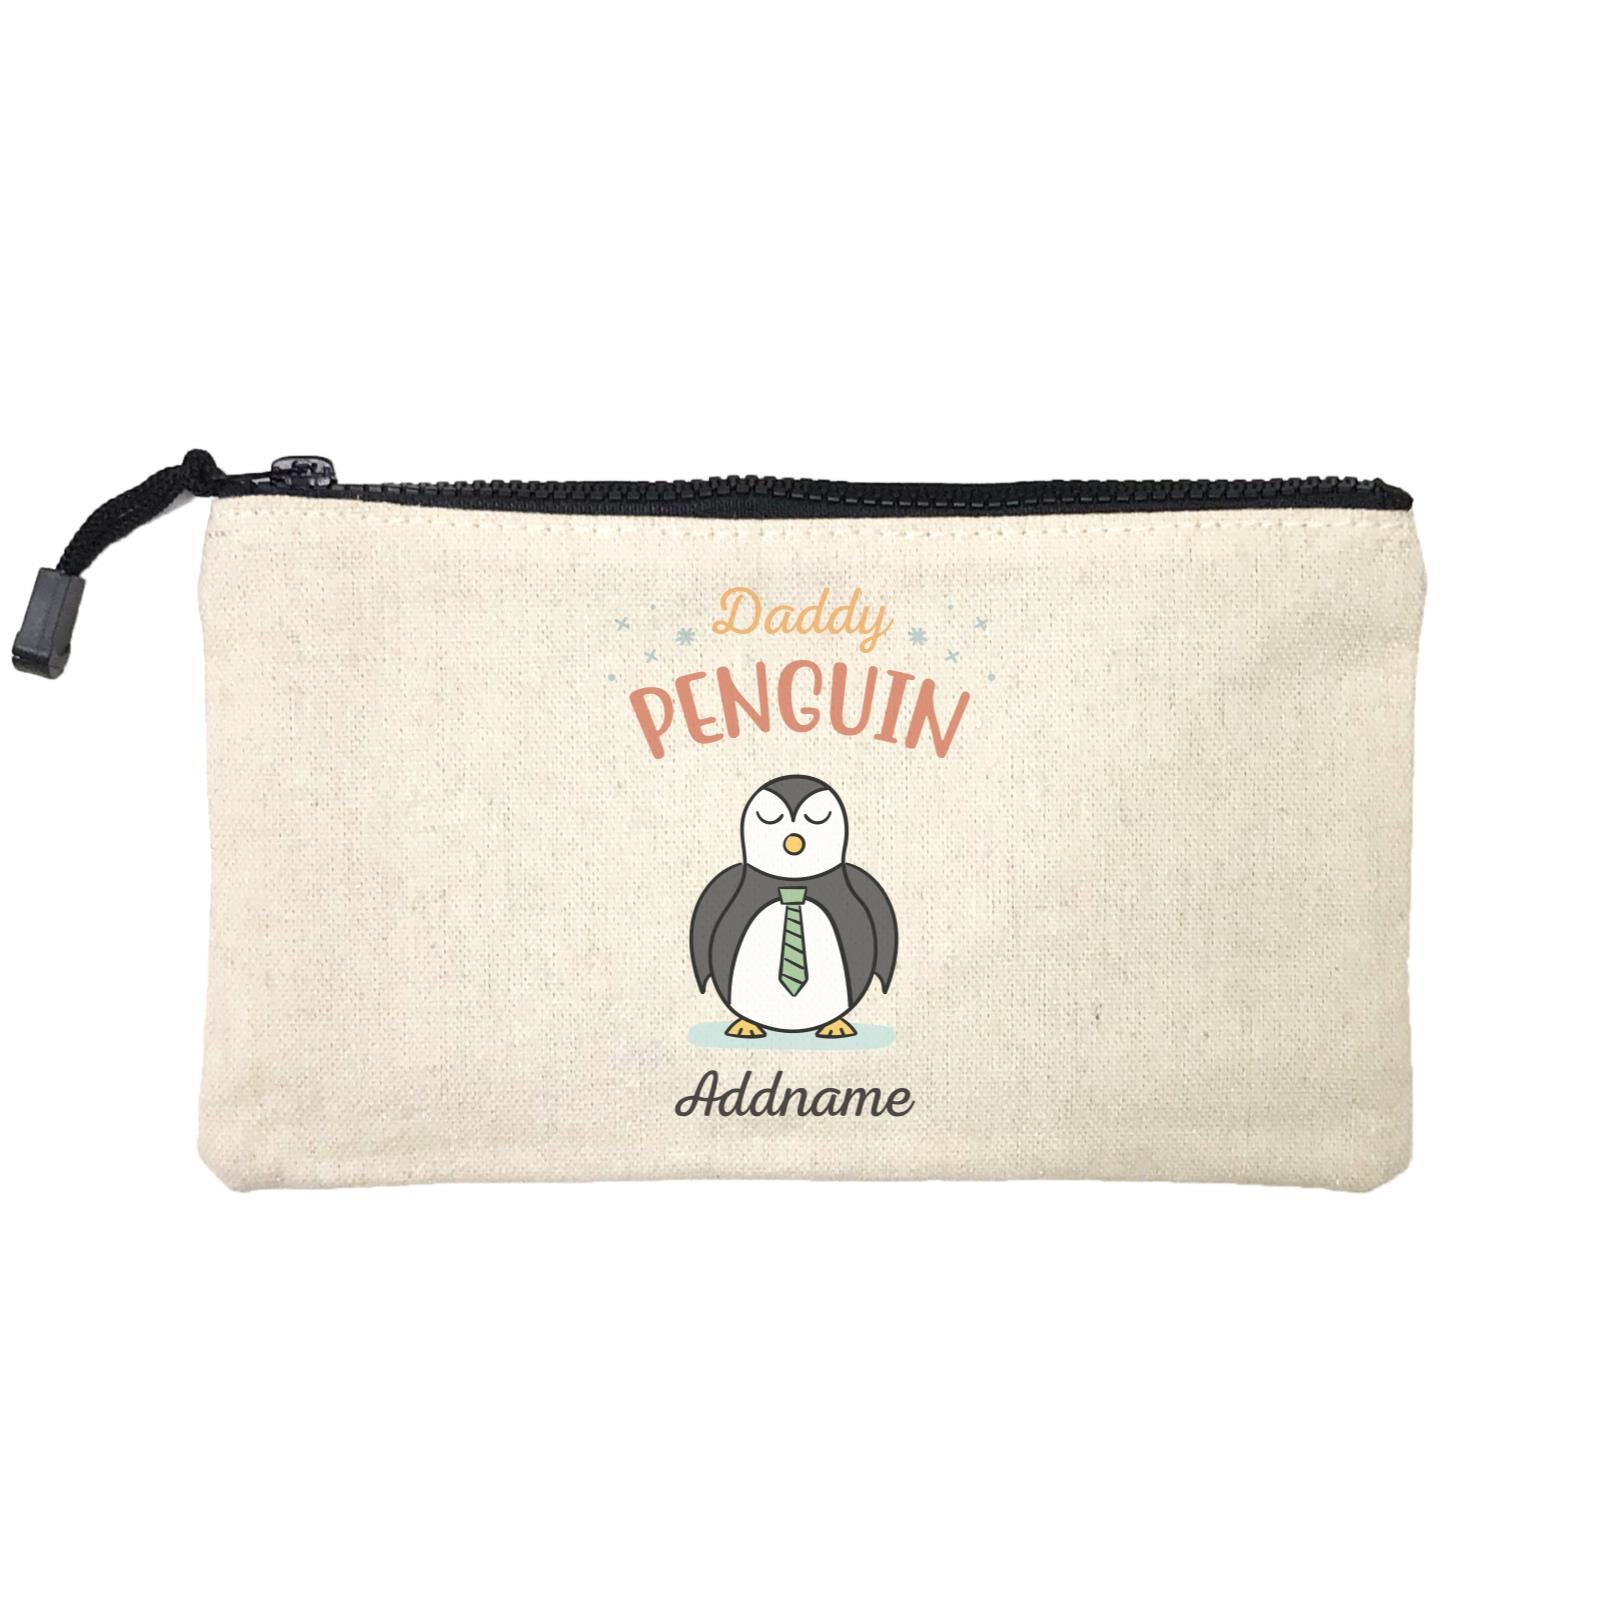 Penguin Family Daddy Penguin Addname Mini Accessories Stationery Pouch